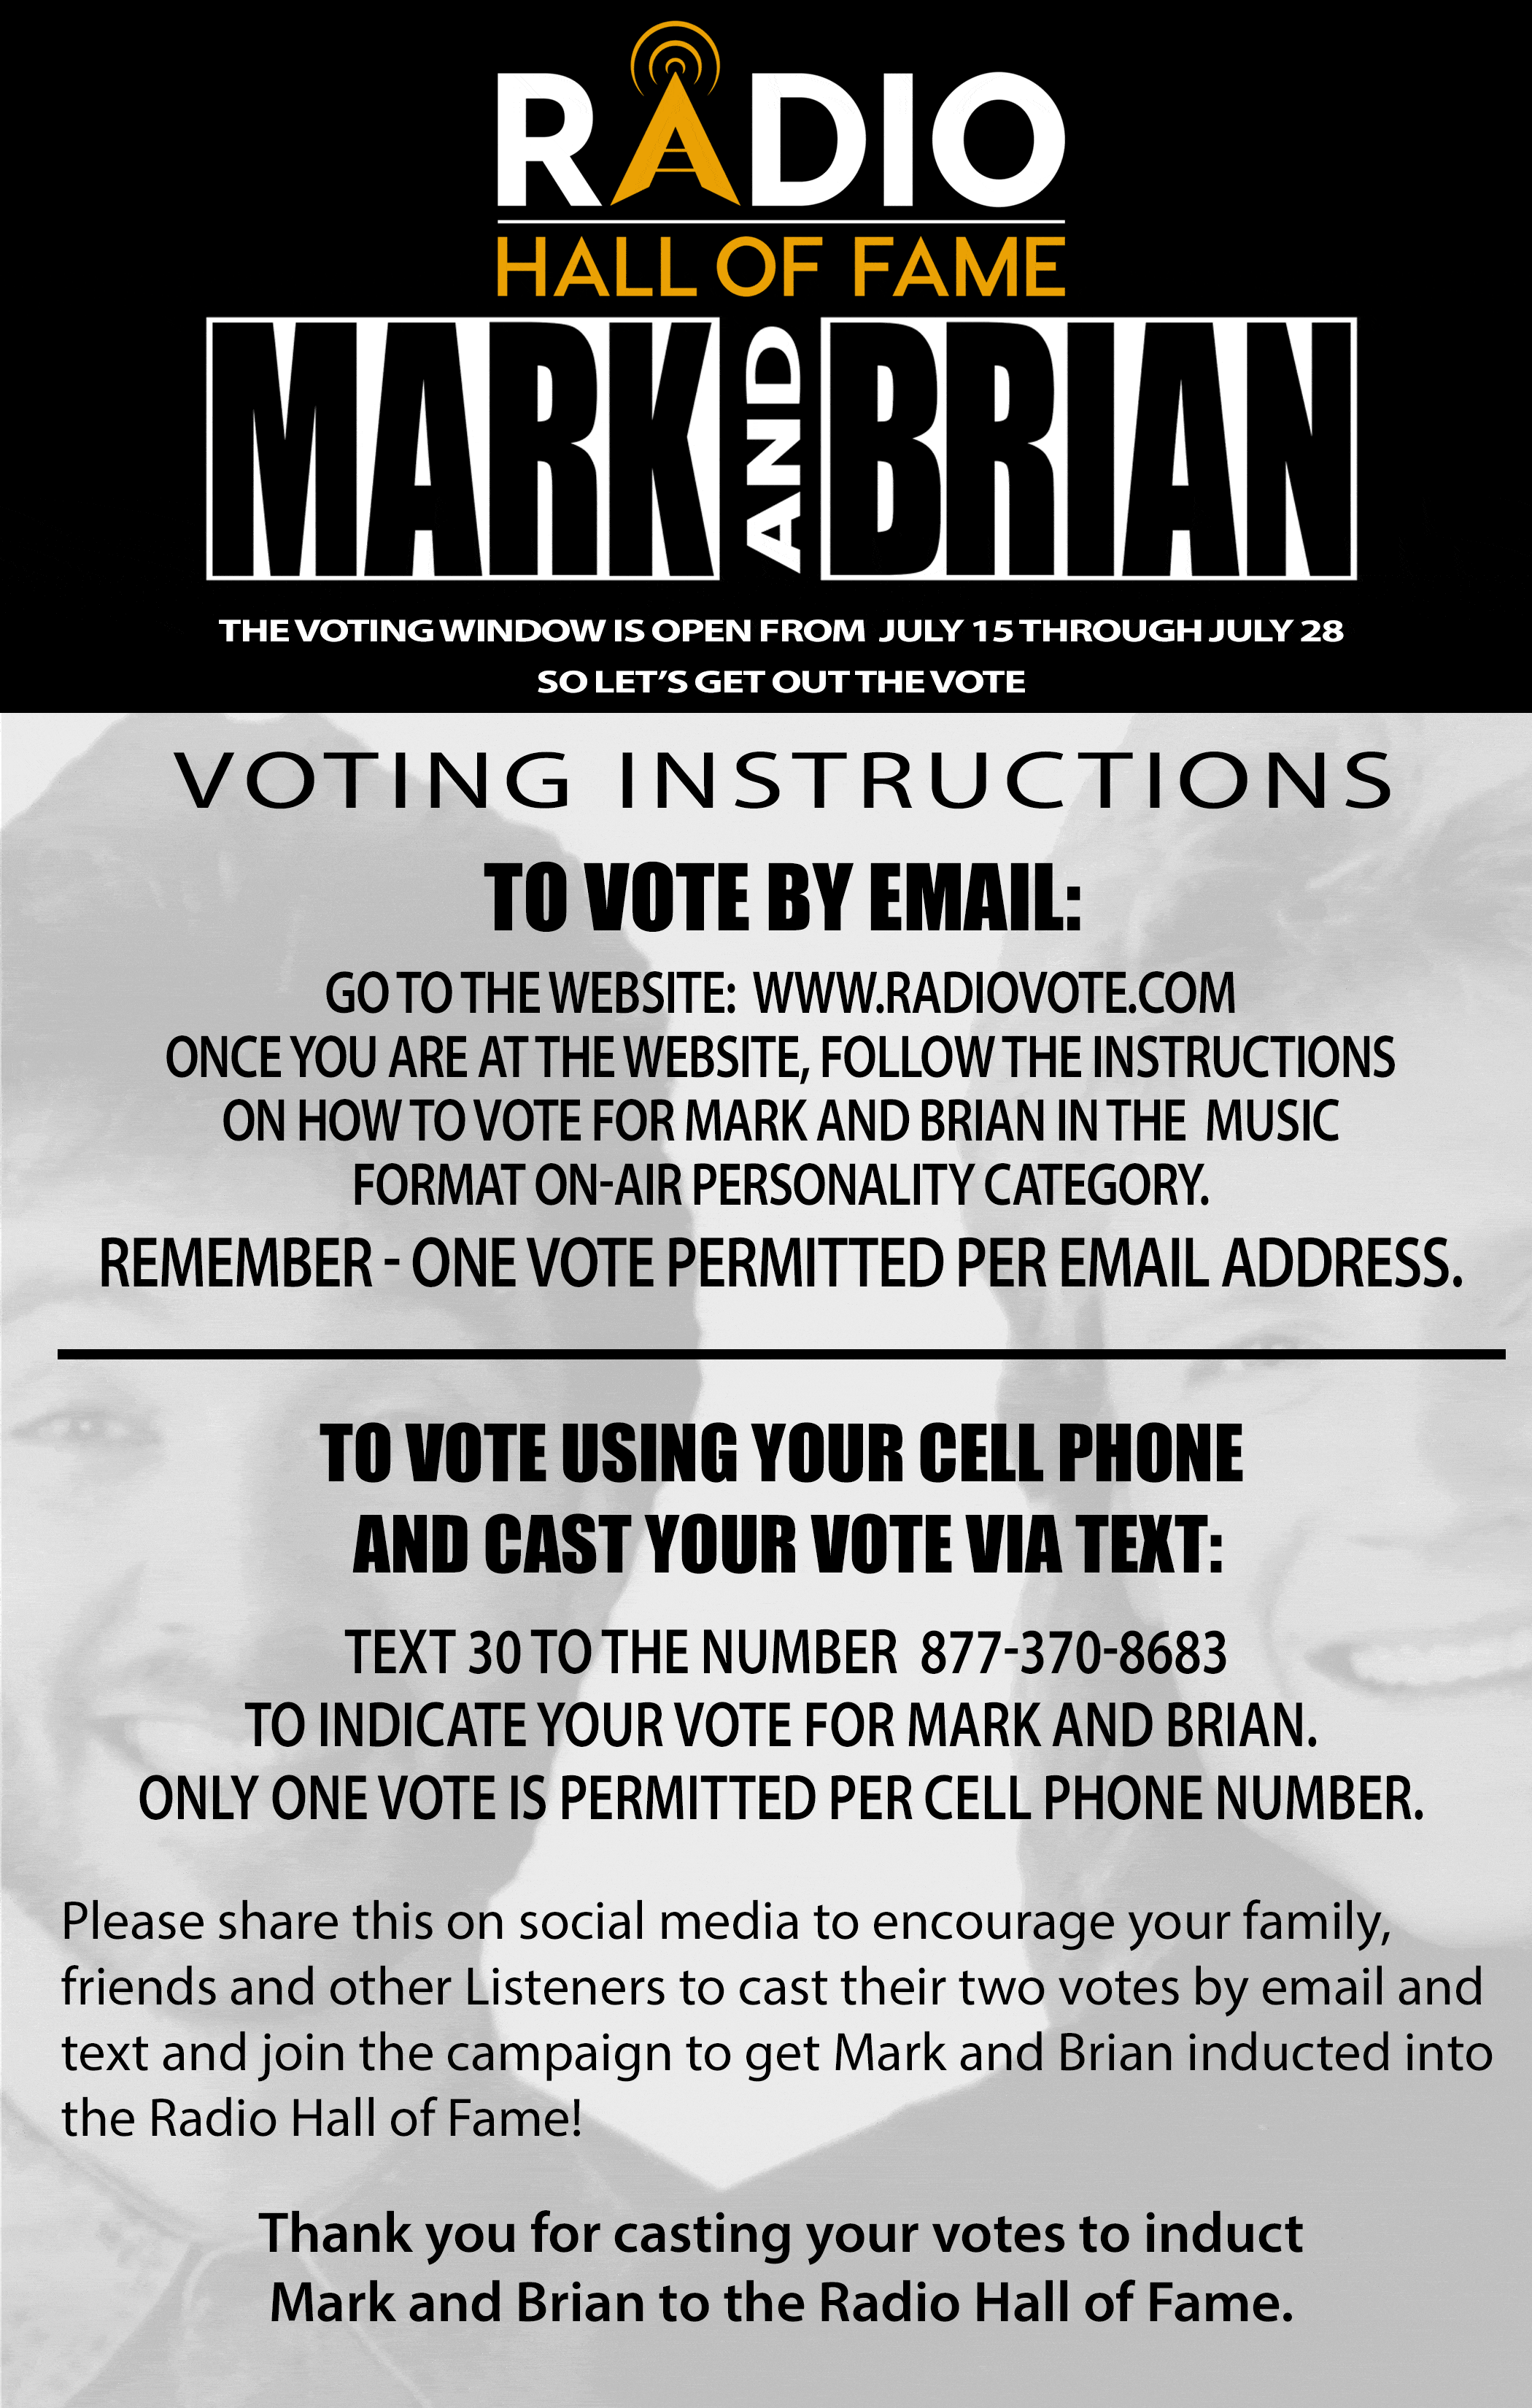 Vote Mark and Brian to the Radio Hall of Fame!